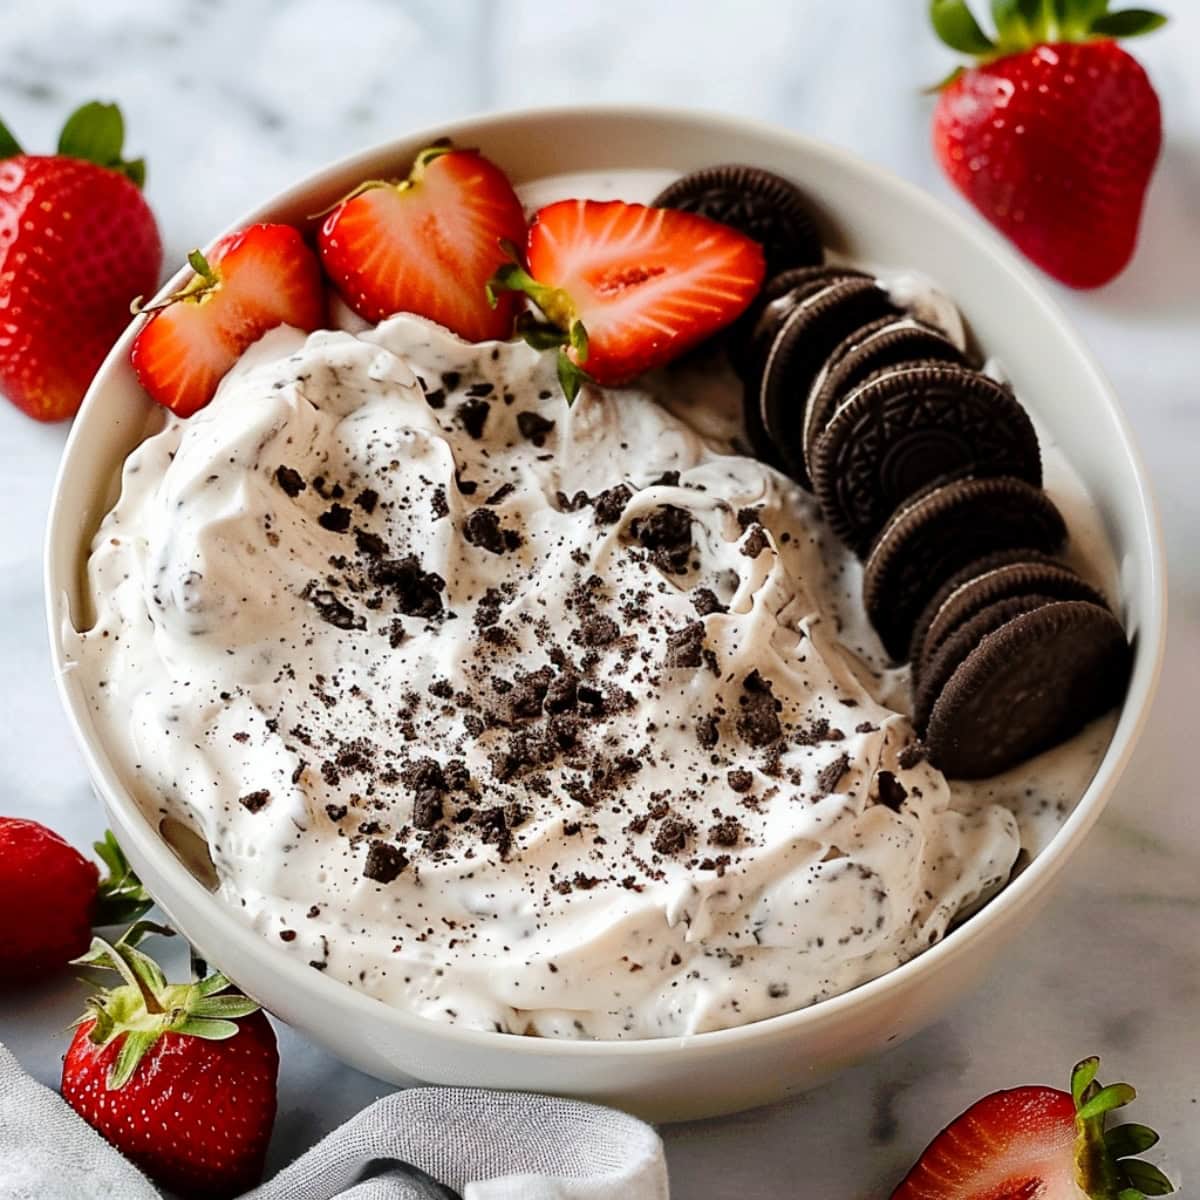 A bowl of creamy Oreo dip surrounded by fresh strawberries and Oreo cookies